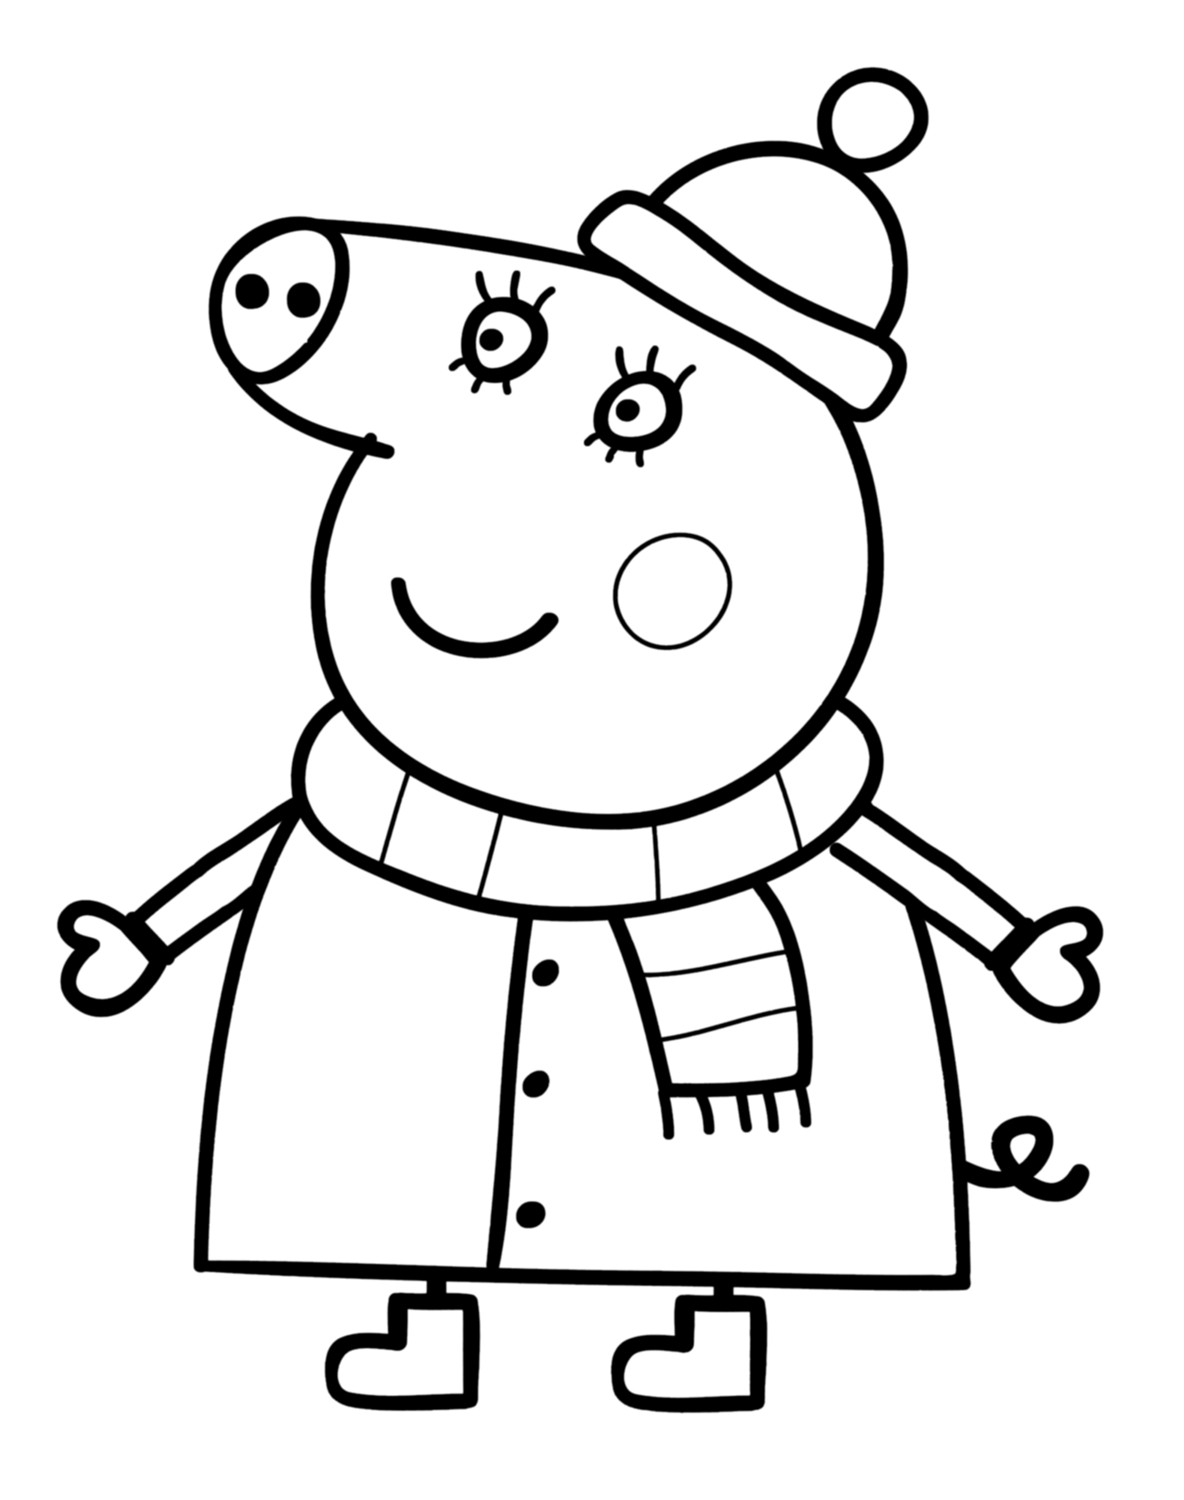 Printable Peppa Pig Coloring Pages
 FUN & LEARN Free worksheets for kid Peppa Pig Coloring